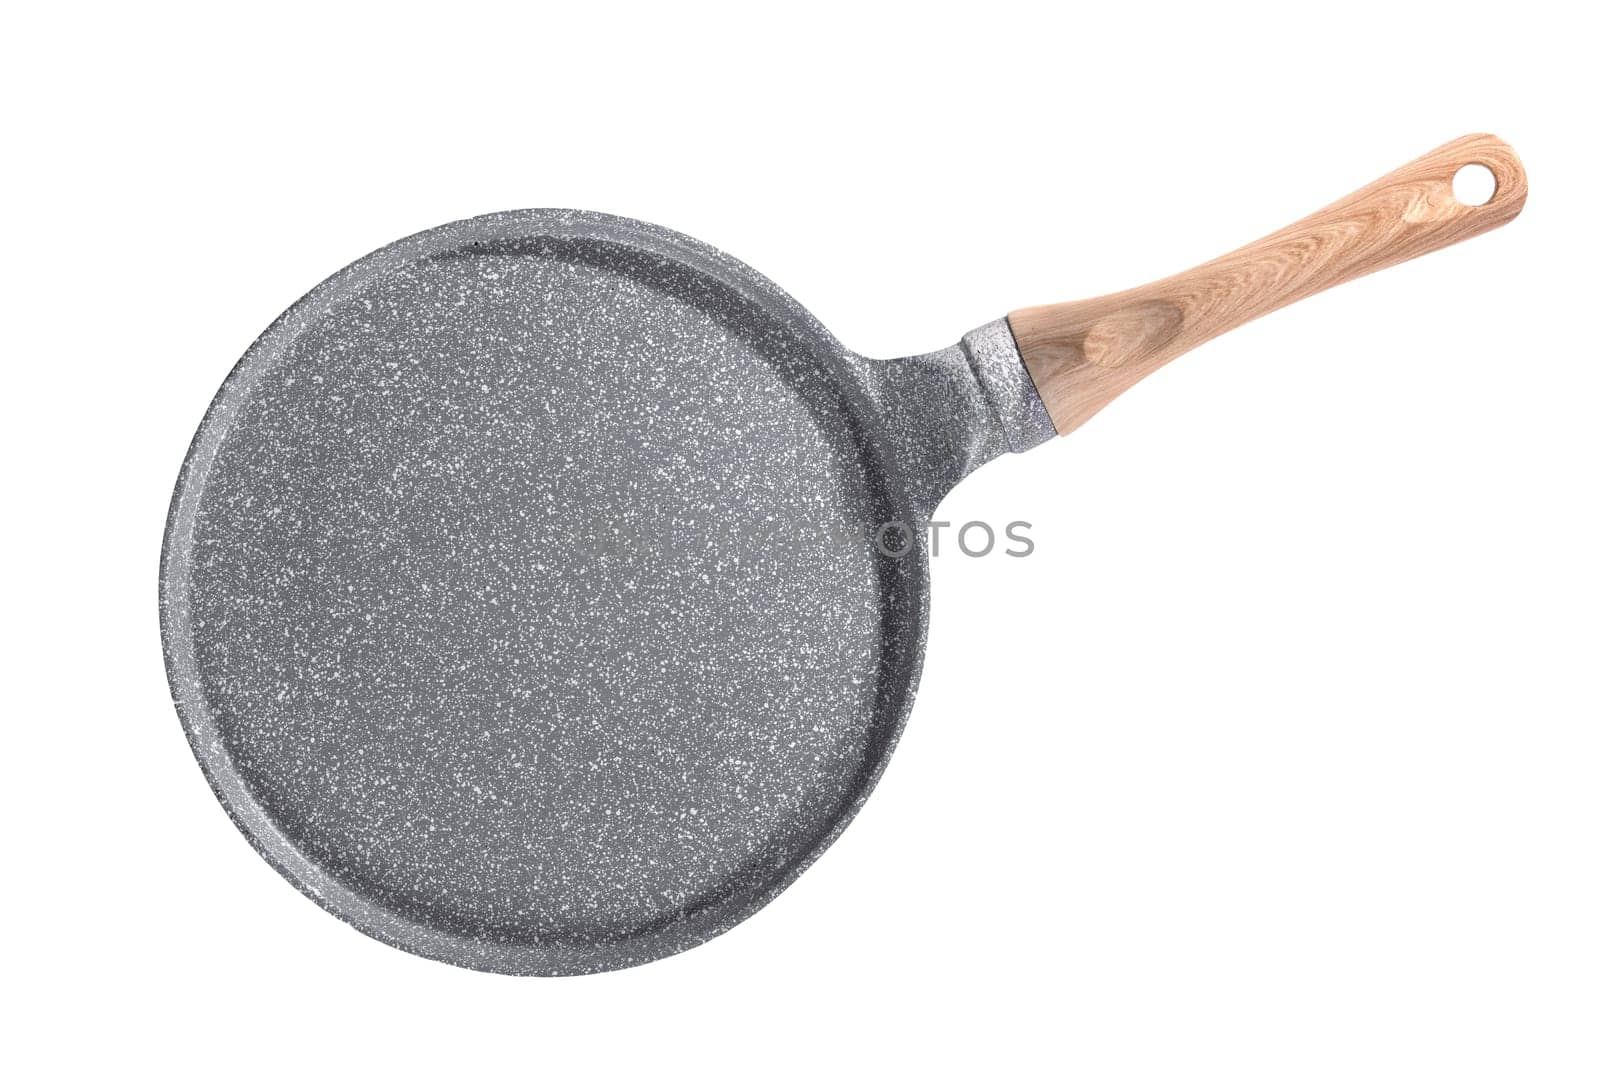 Empty pan for frying pancakes isolated on a white background. Top view by Shablovskyistock